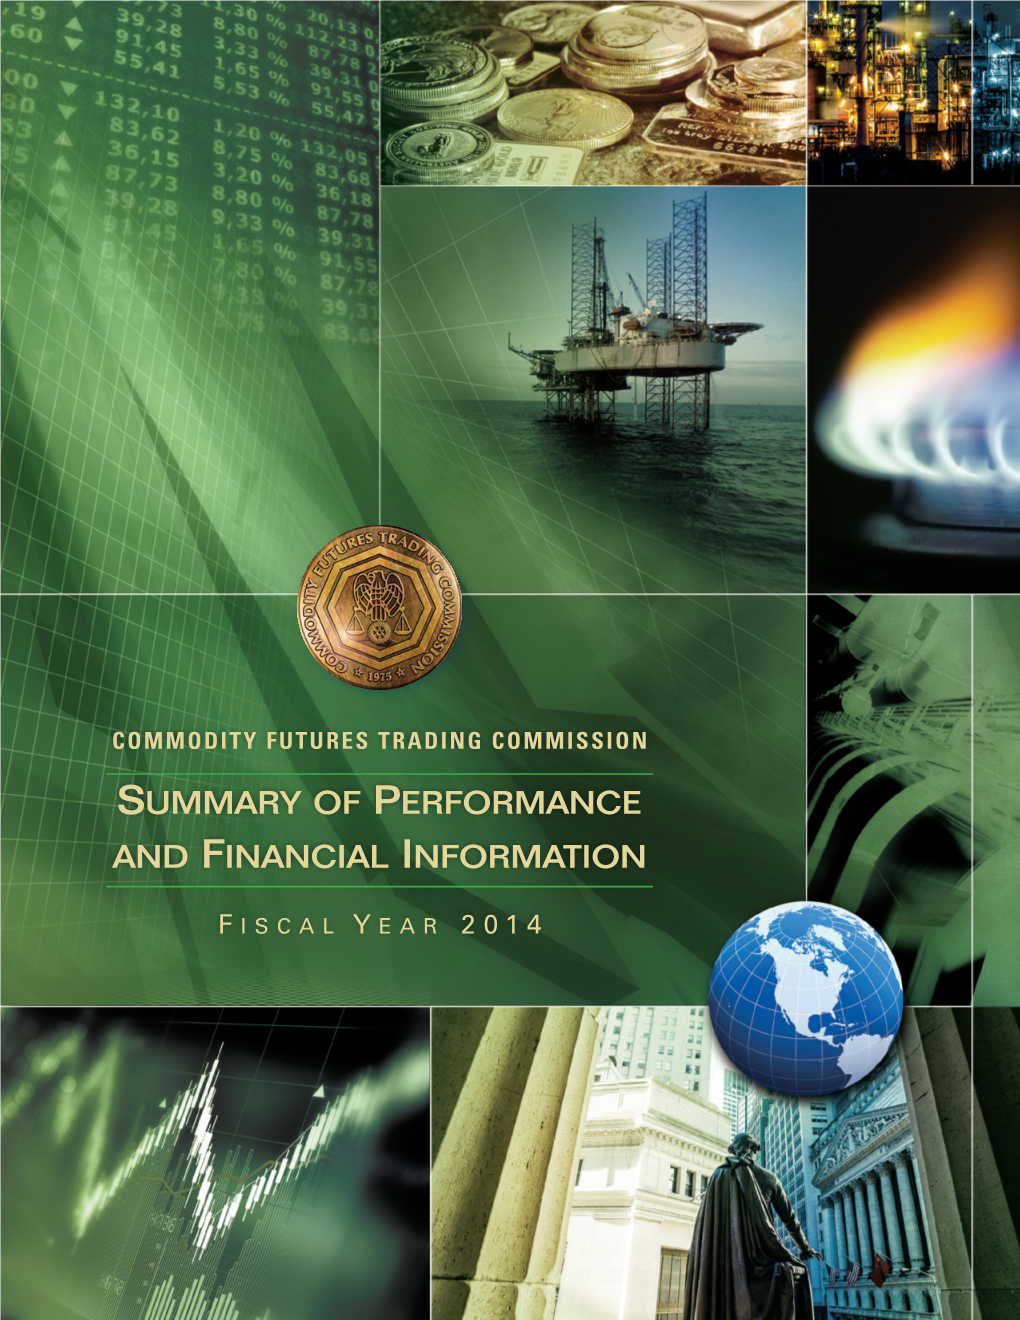 CFTC Summary of Performance and Financial Information for Fiscal Year